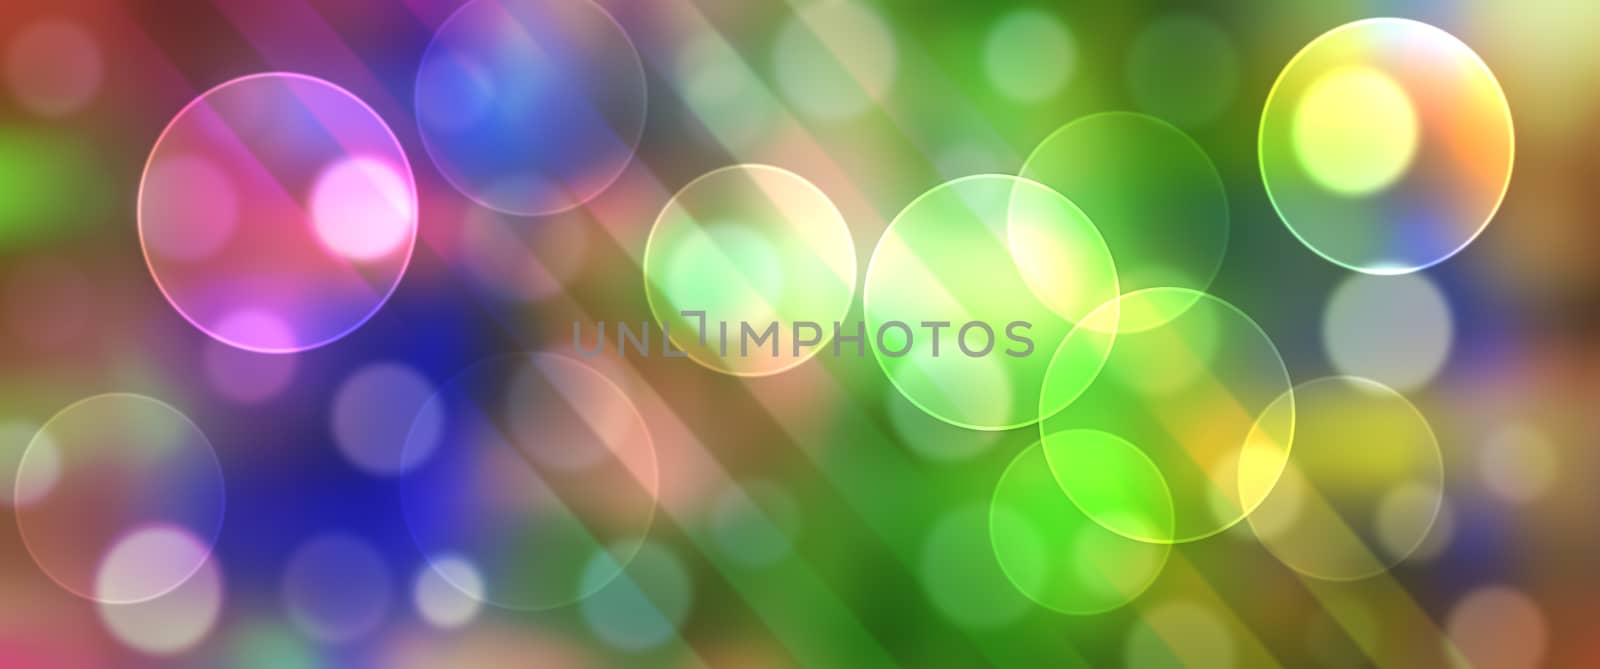 Panorama banner illustration of abstract bright rainbow background with circle bubbles and lines